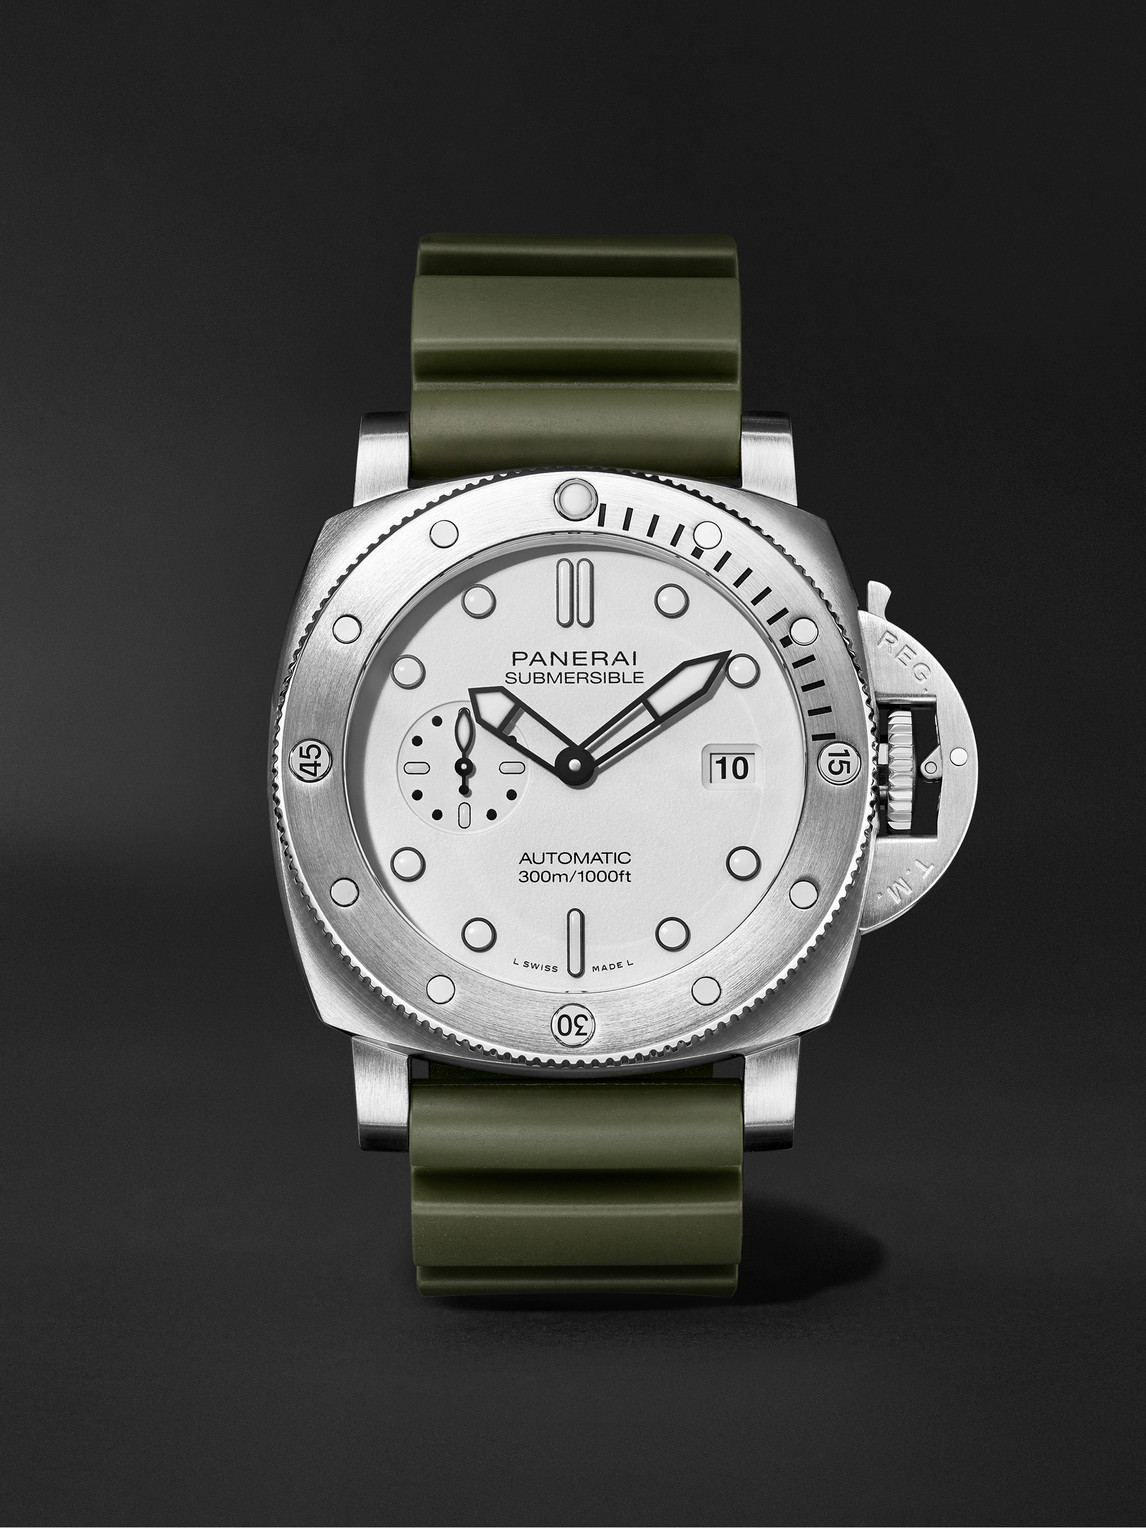 Panerai Submersible Quarantaquattro Automatic 44mm Brushed Stainless Steel And Rubber Watch, Ref. No. Pam012 In White